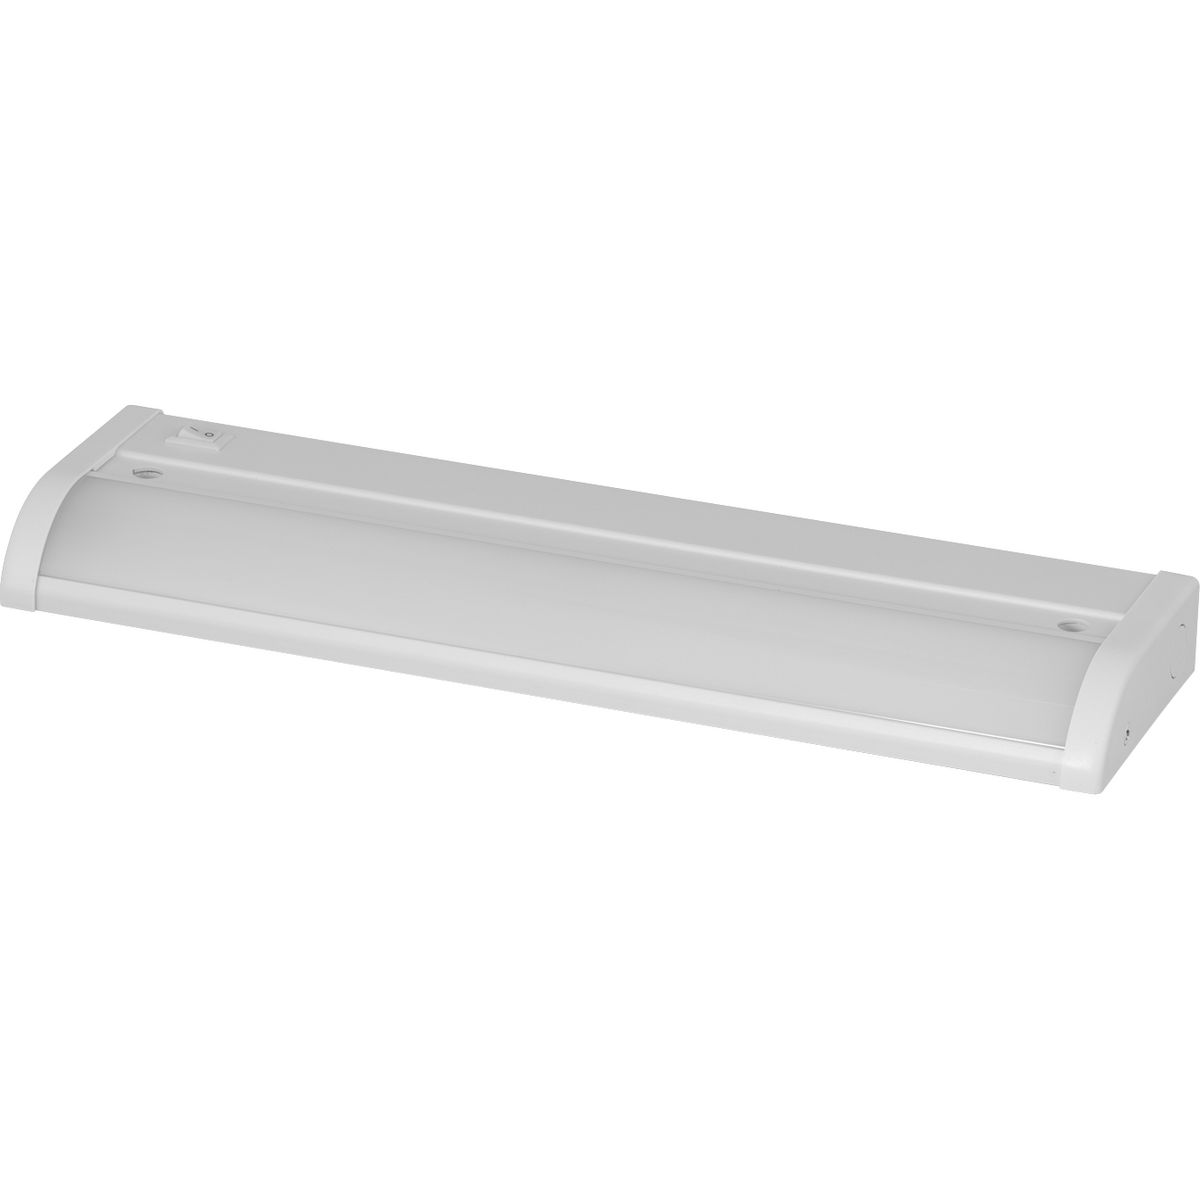 The HIDE-A-LITE V 11-1/2 in linear undercabinet fixture provides the ideal solution for residential and light commercial applications. Extruded aluminum construction featuring a lens design to optimizes light distribution to ensure proper illumination. The HIDE-A-LITE V series utilizes a simple mounting method, and direct wiring, for a hassle free installation. Energy efficient and functional lighting, which can be dimmed down to 10 percent with many Forward Phase Triac and Electronic Low Voltage ELV dimmers. 12 in linear undercabinet fixture. Antique Bronze powder coat finish.